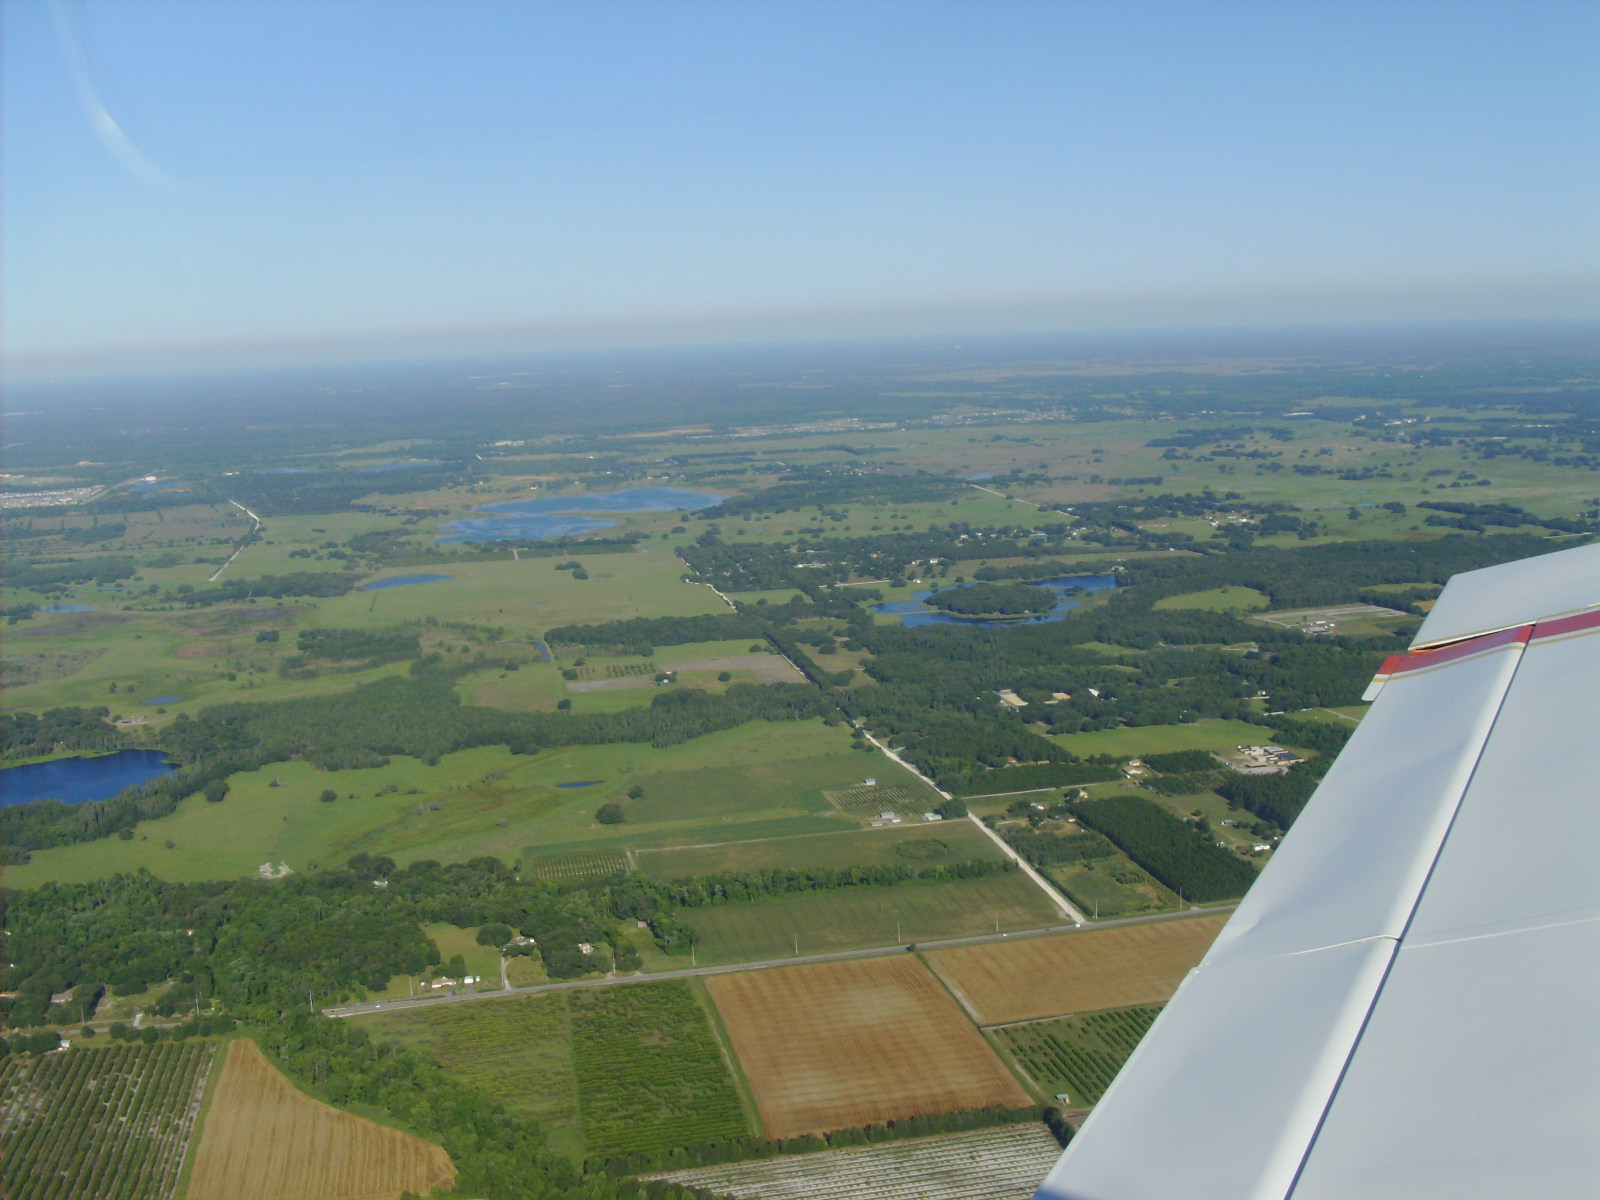 See Florida from a bird's eye view!